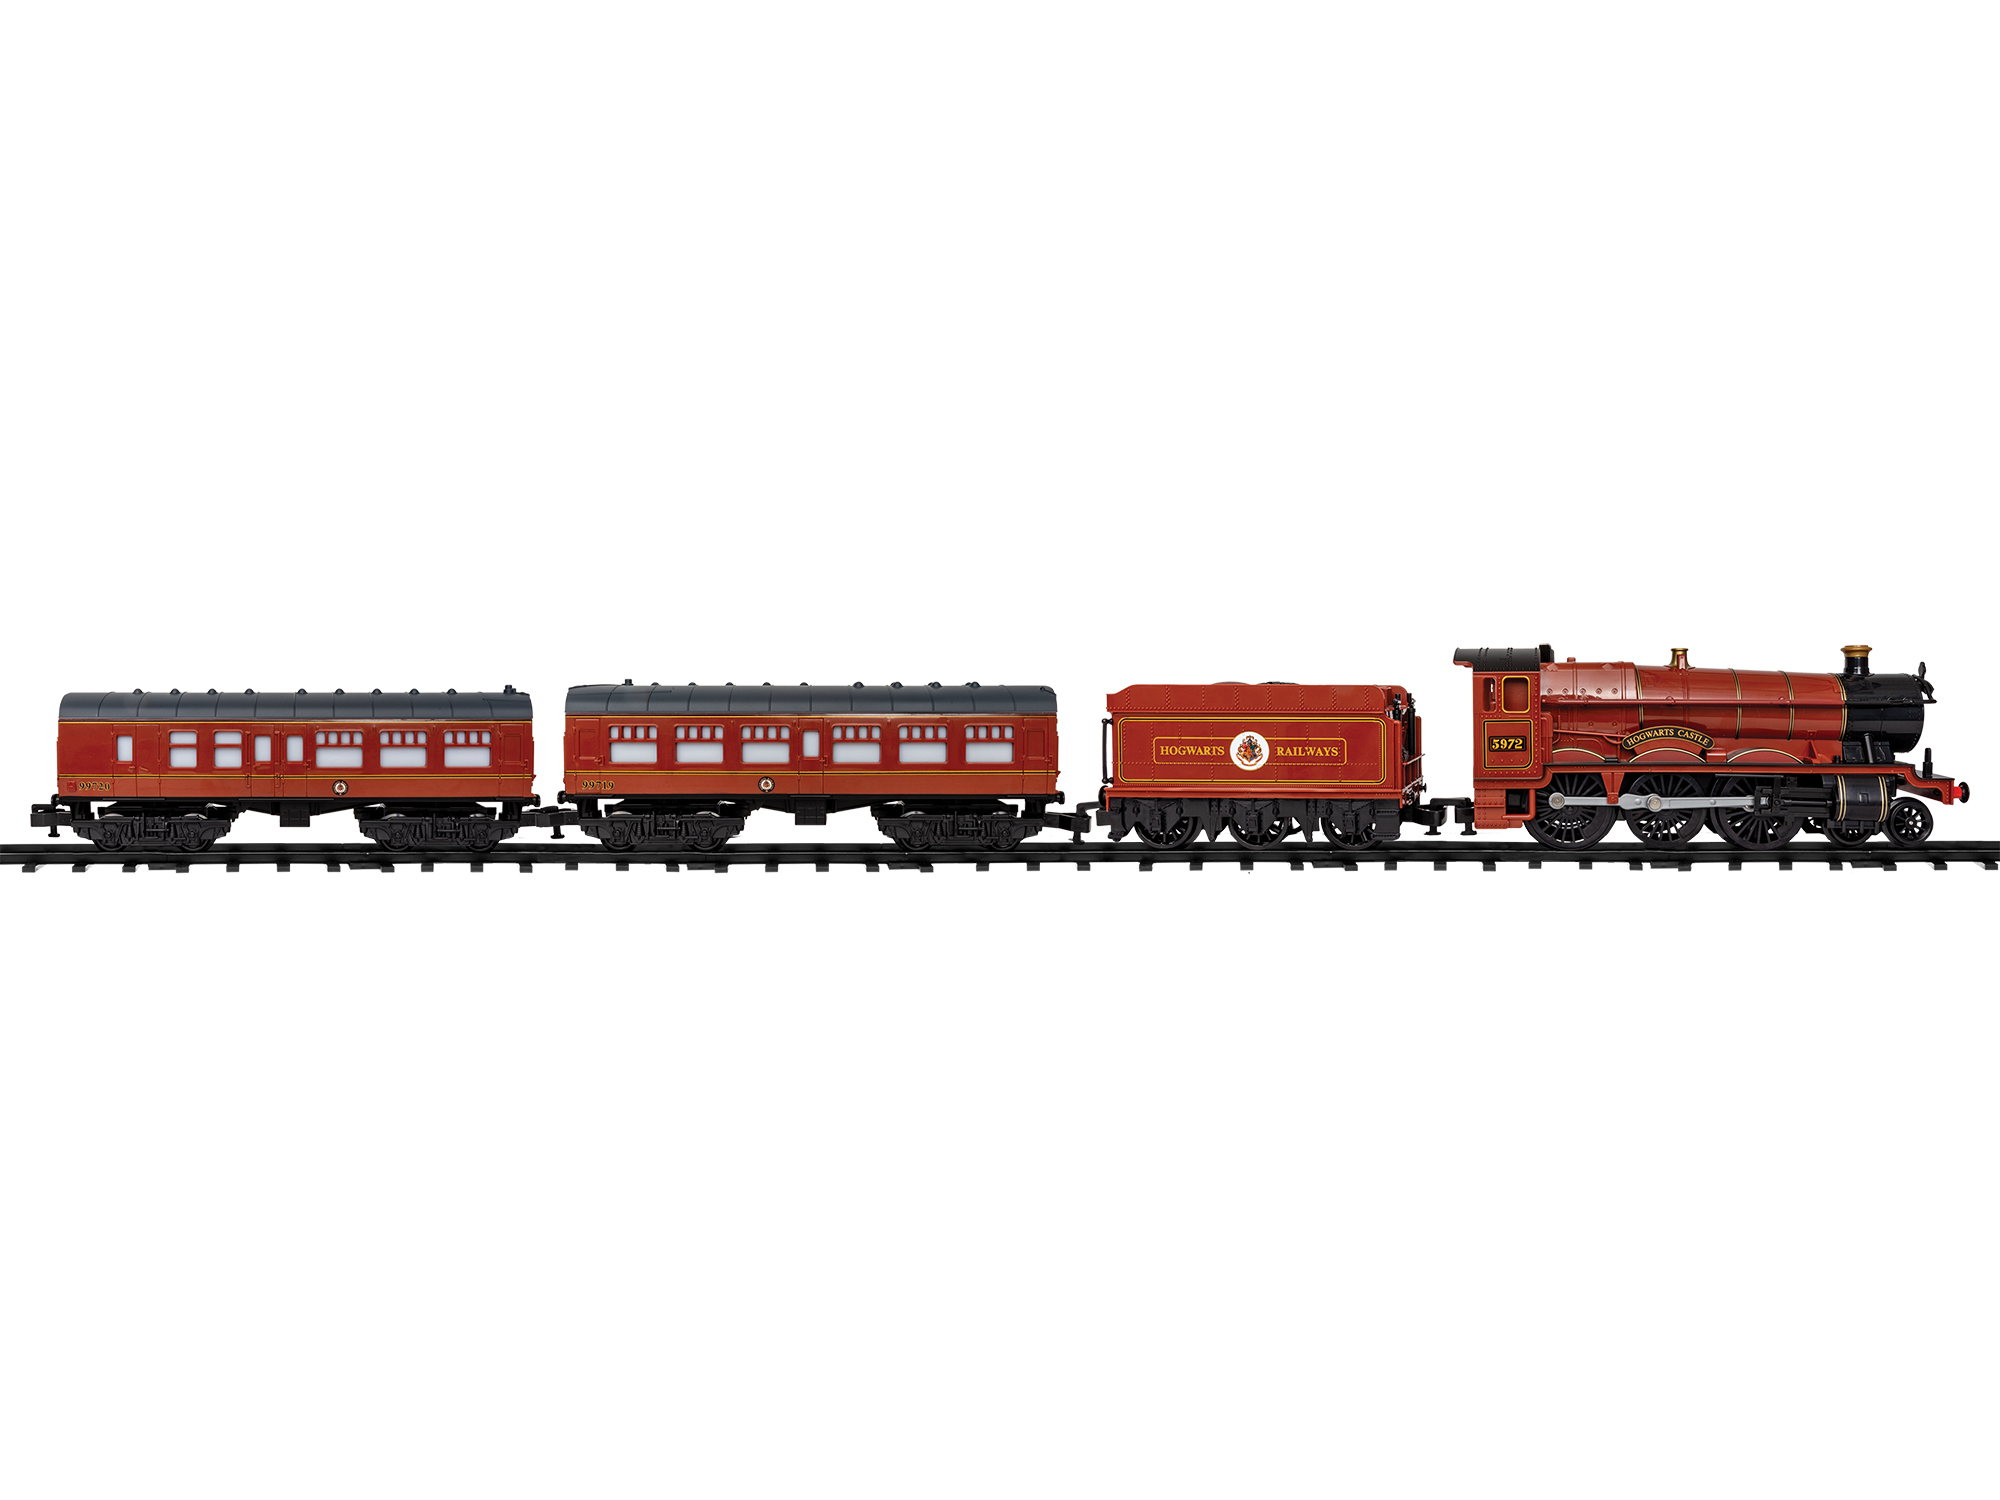 Lionel Trains Harry Potter Hogwarts Express Ready to Play Train Set